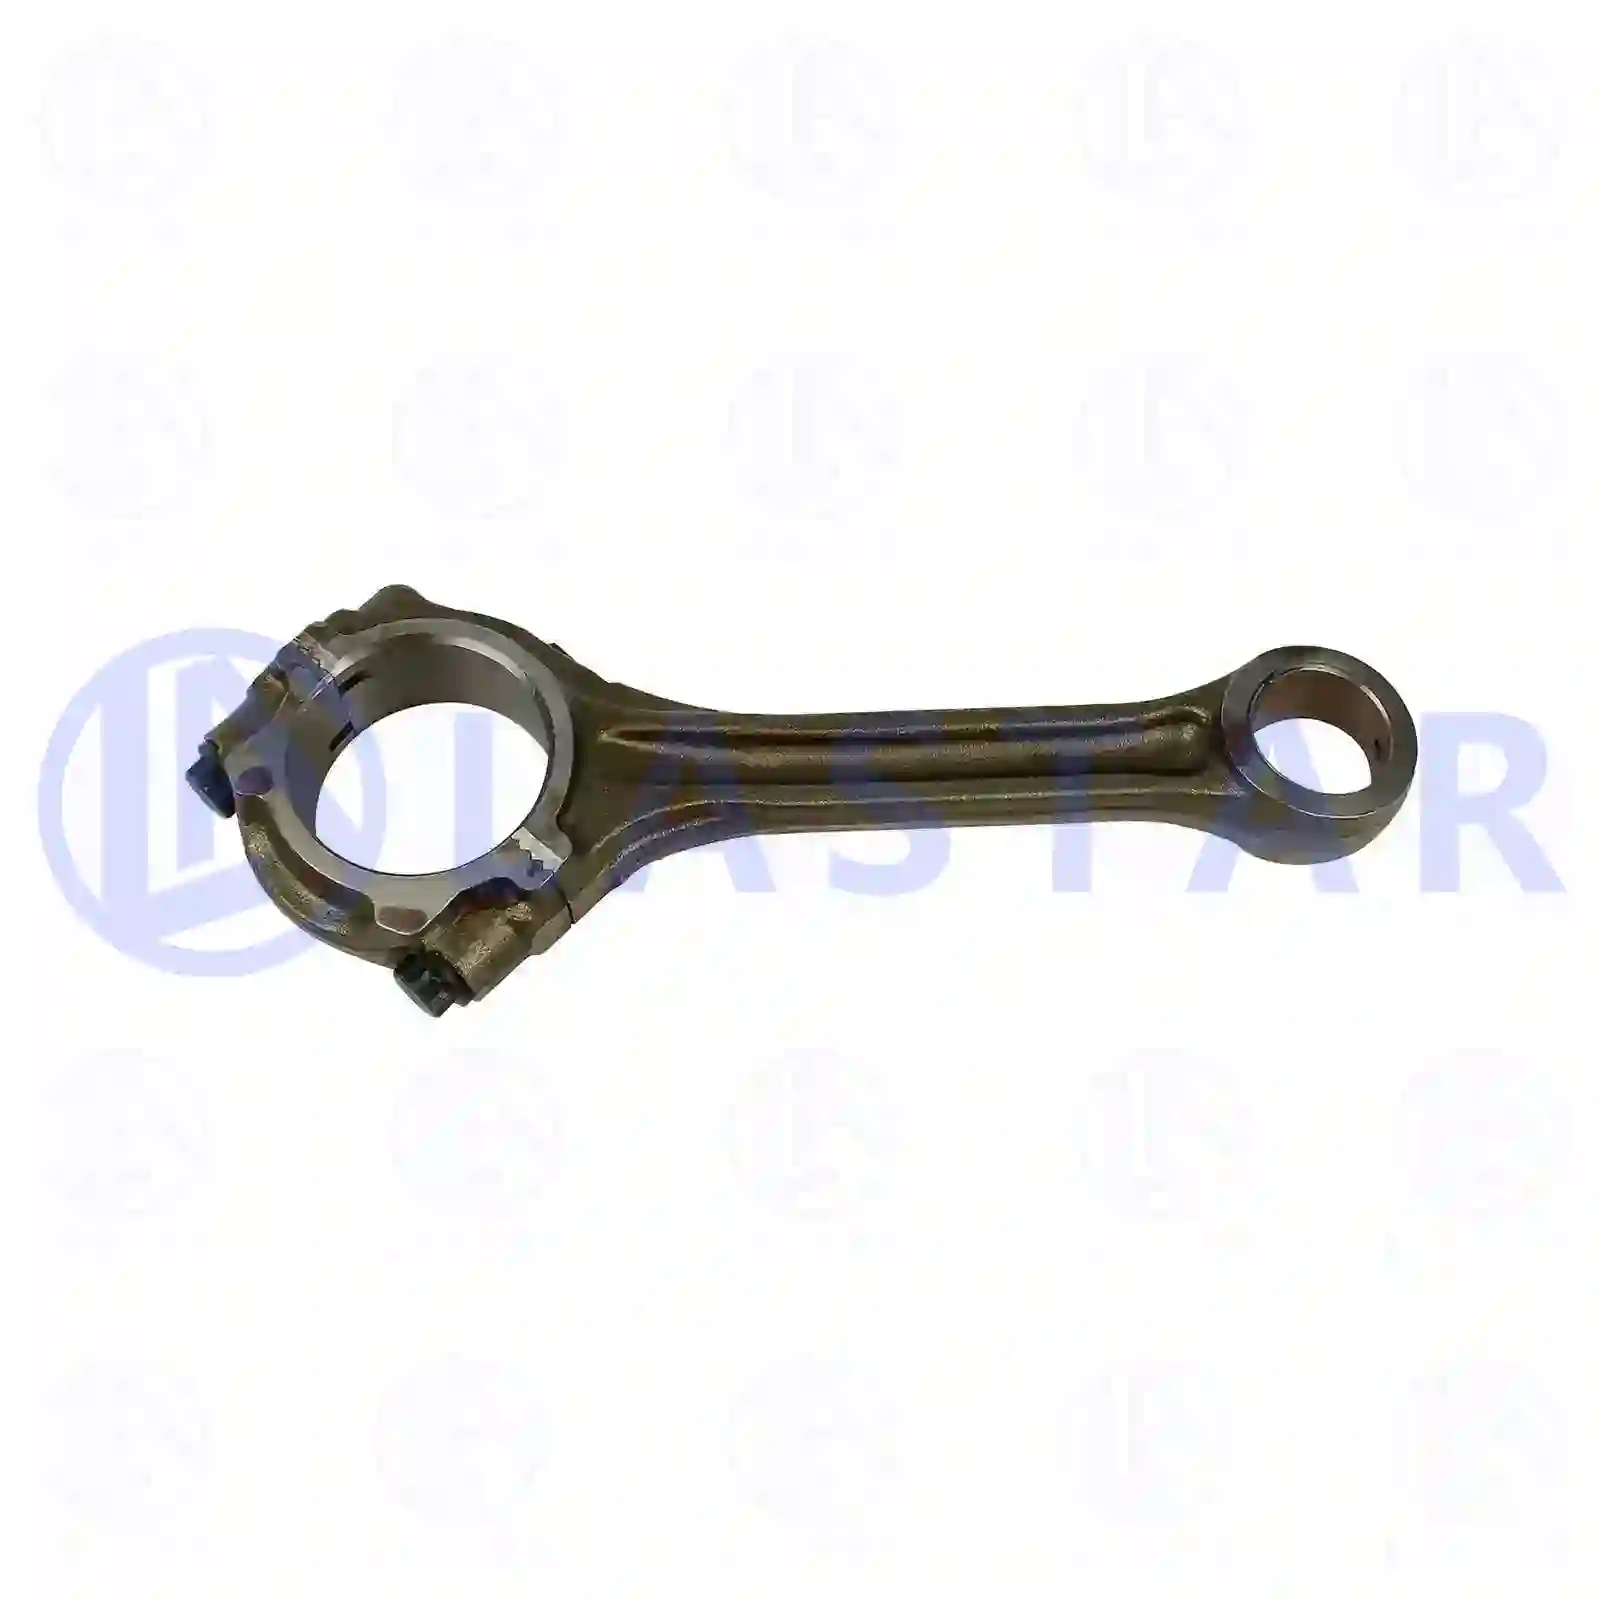 Connecting rod, conical head, 77701862, 3660303020, 3660303120, 3660303620, 366030362080, 3660307320, 3760307320, 3760307420 ||  77701862 Lastar Spare Part | Truck Spare Parts, Auotomotive Spare Parts Connecting rod, conical head, 77701862, 3660303020, 3660303120, 3660303620, 366030362080, 3660307320, 3760307320, 3760307420 ||  77701862 Lastar Spare Part | Truck Spare Parts, Auotomotive Spare Parts